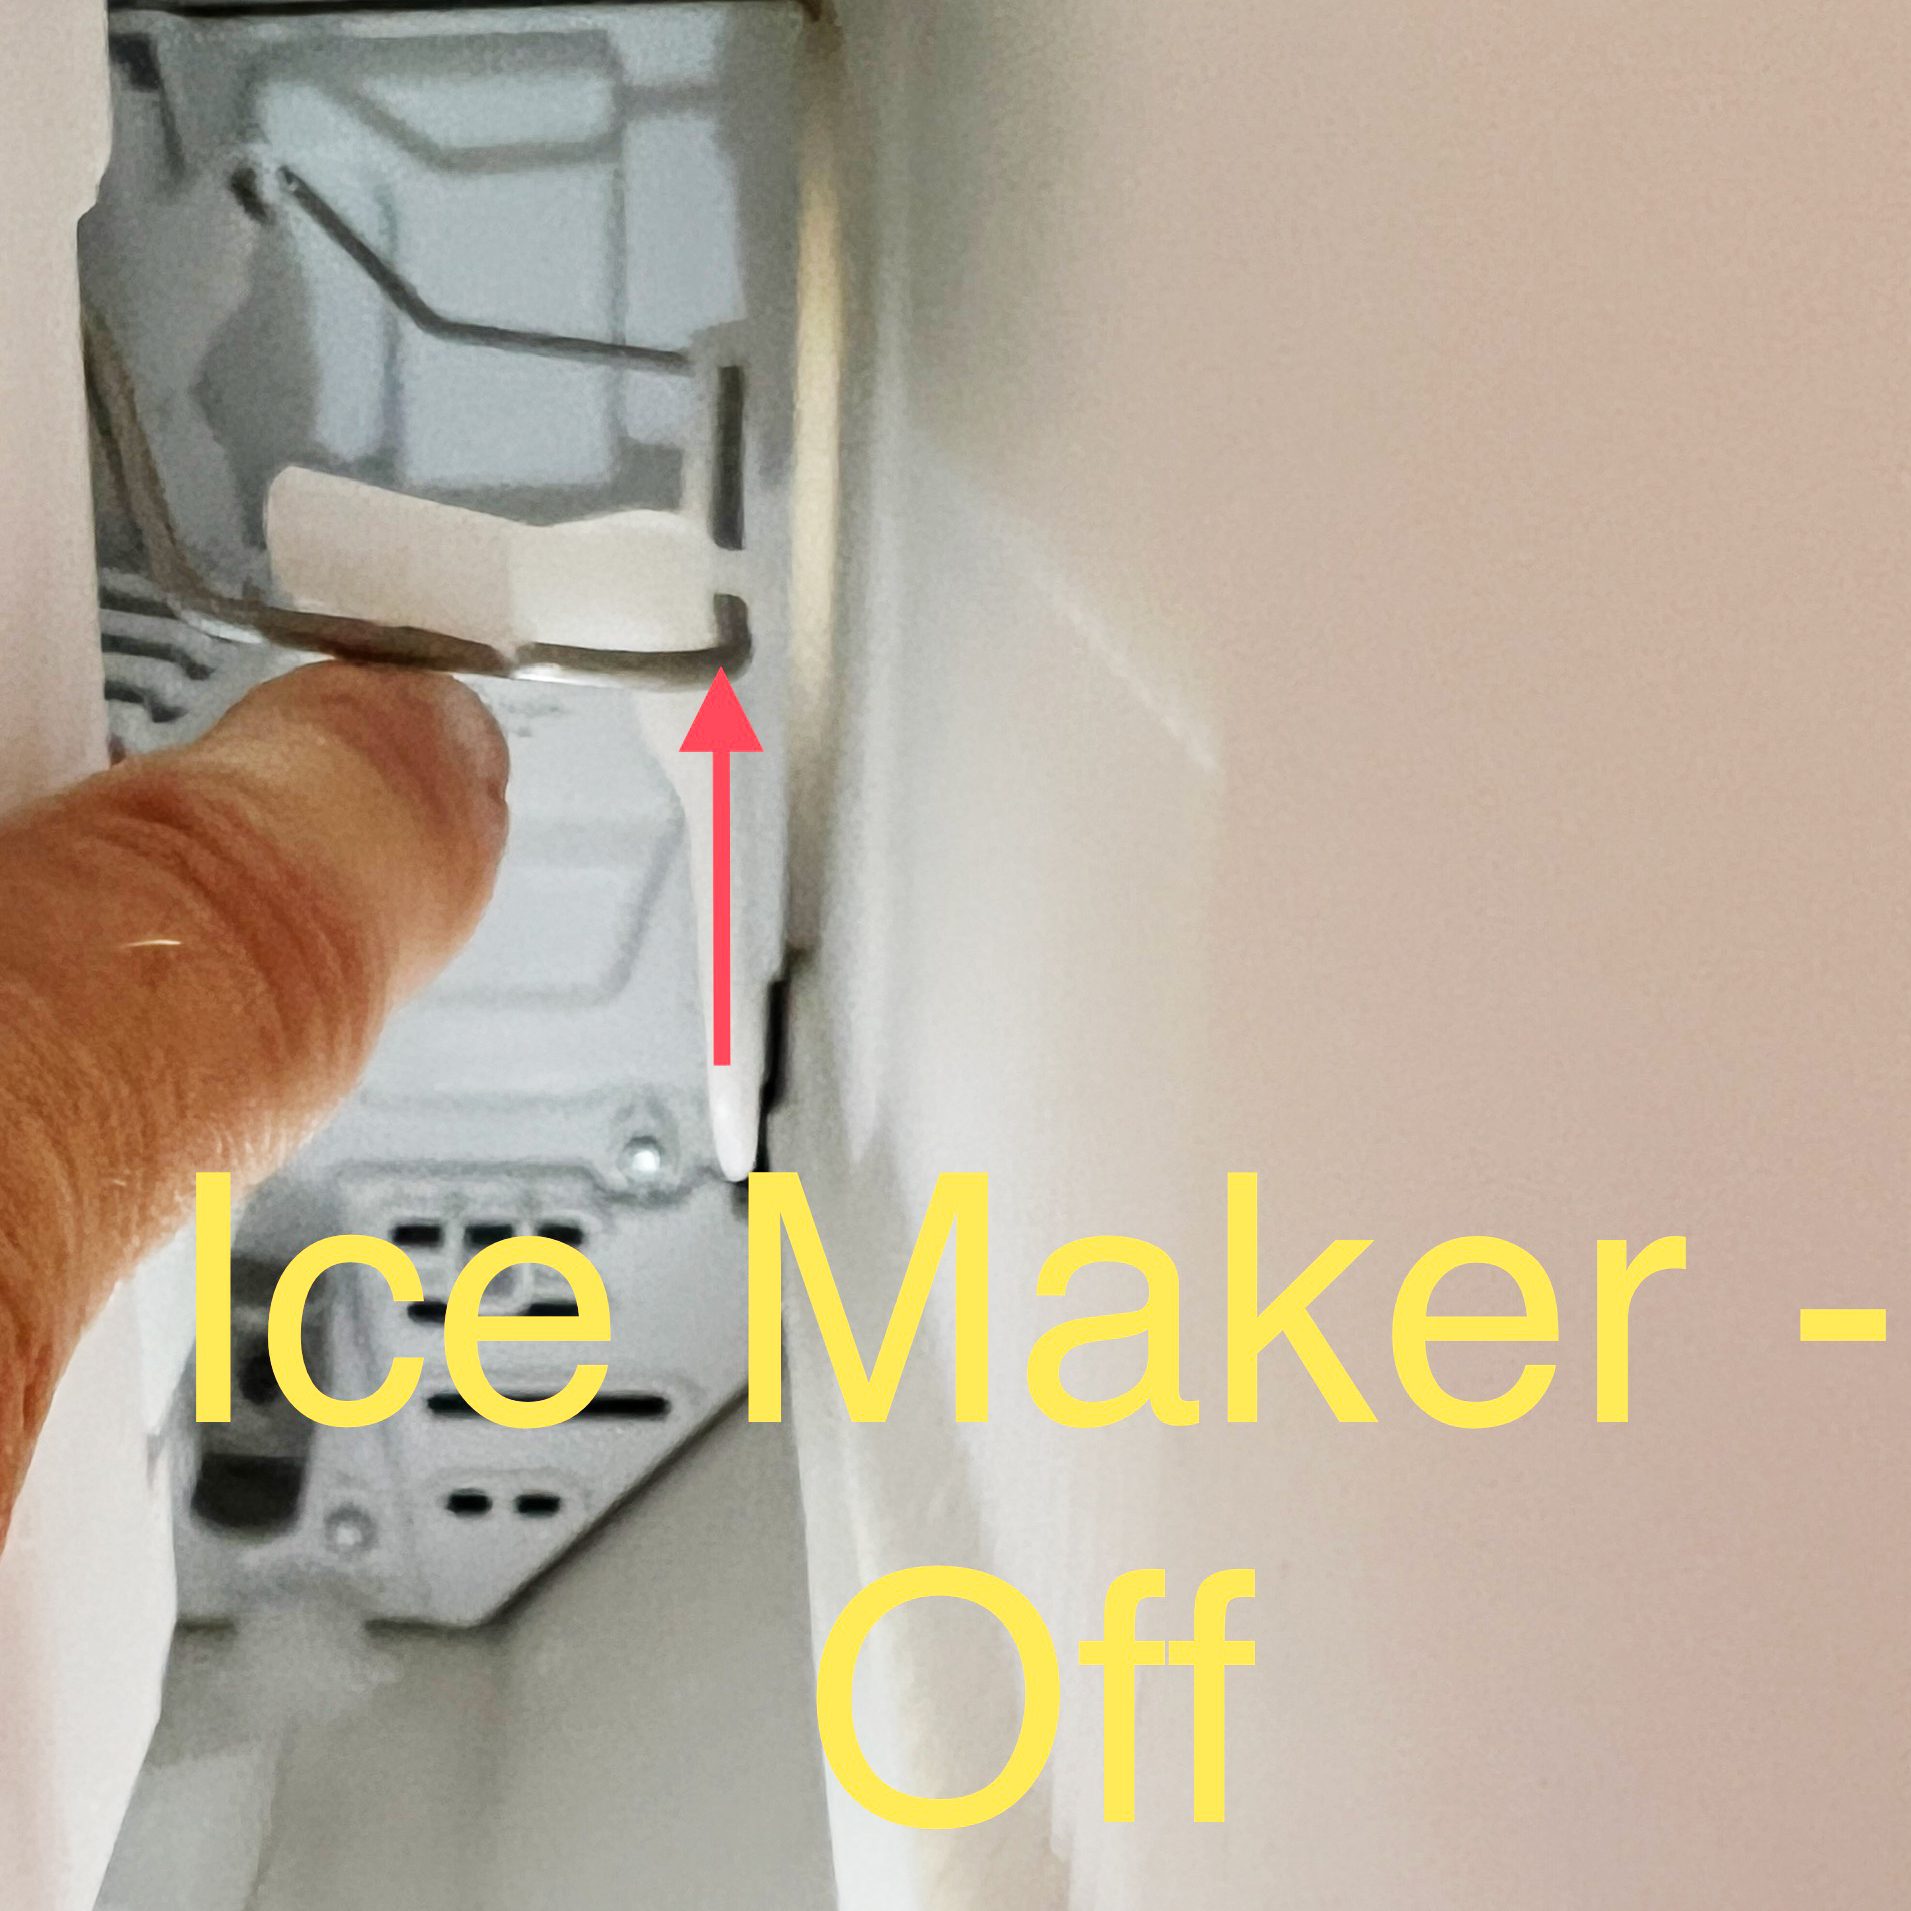 fixing an ice maker